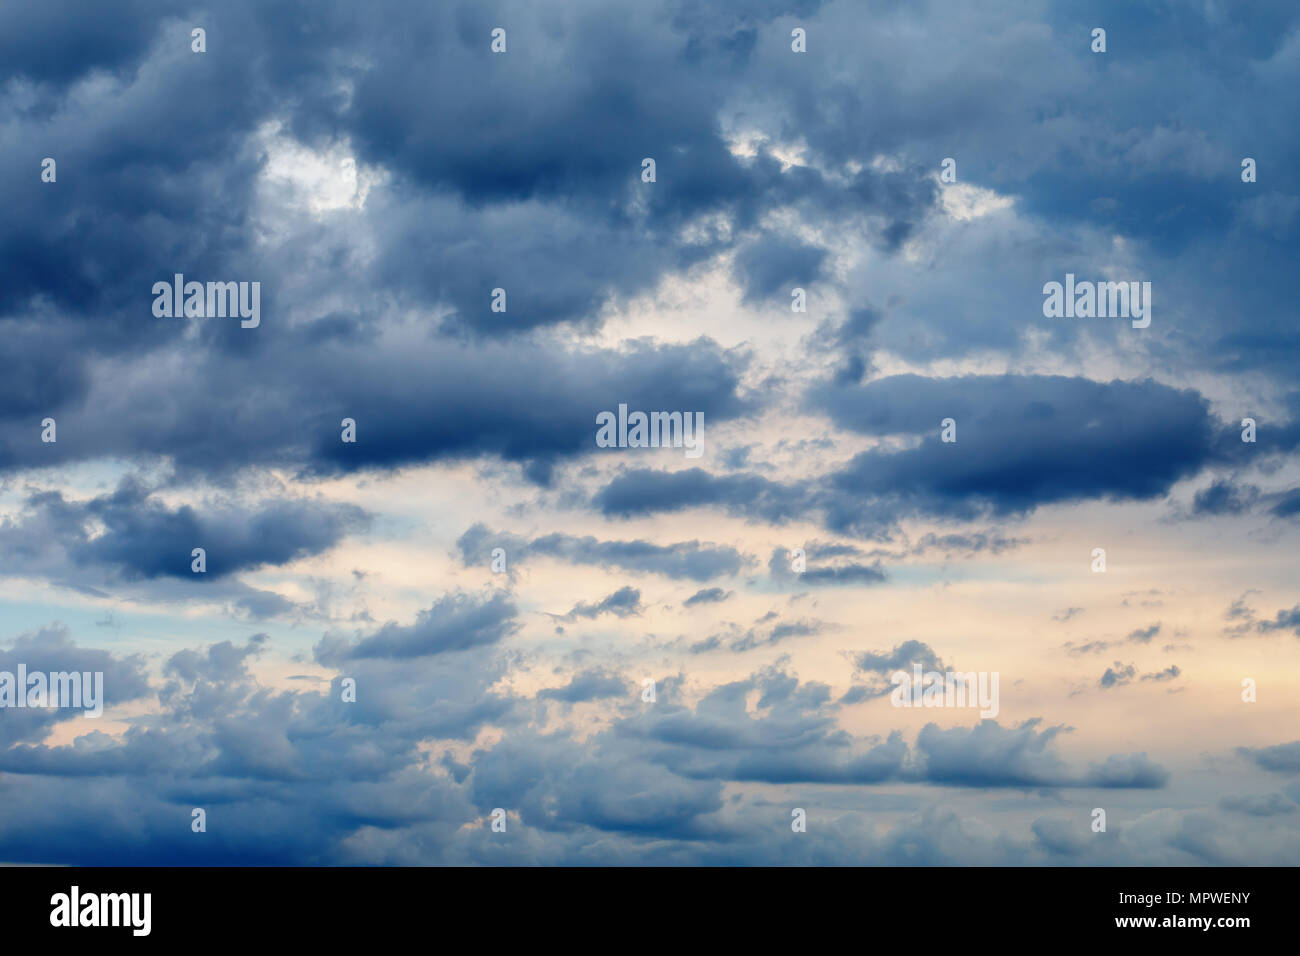 Texture of the sky with rain clouds Stock Photo